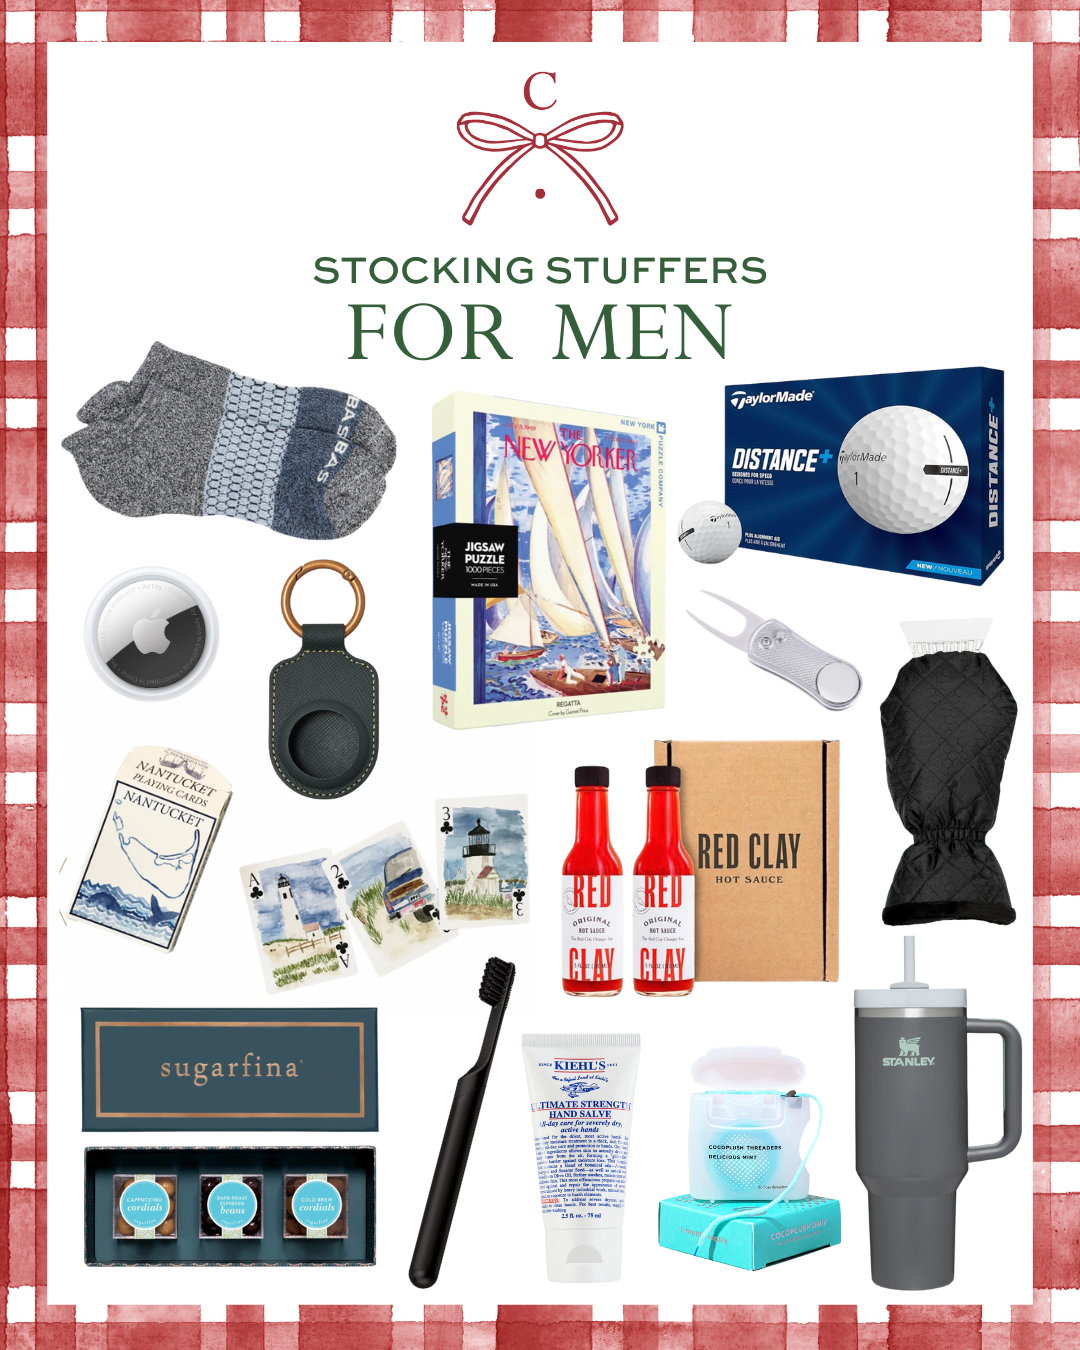 CARLY STOCKING STUFFERS FOR MEN